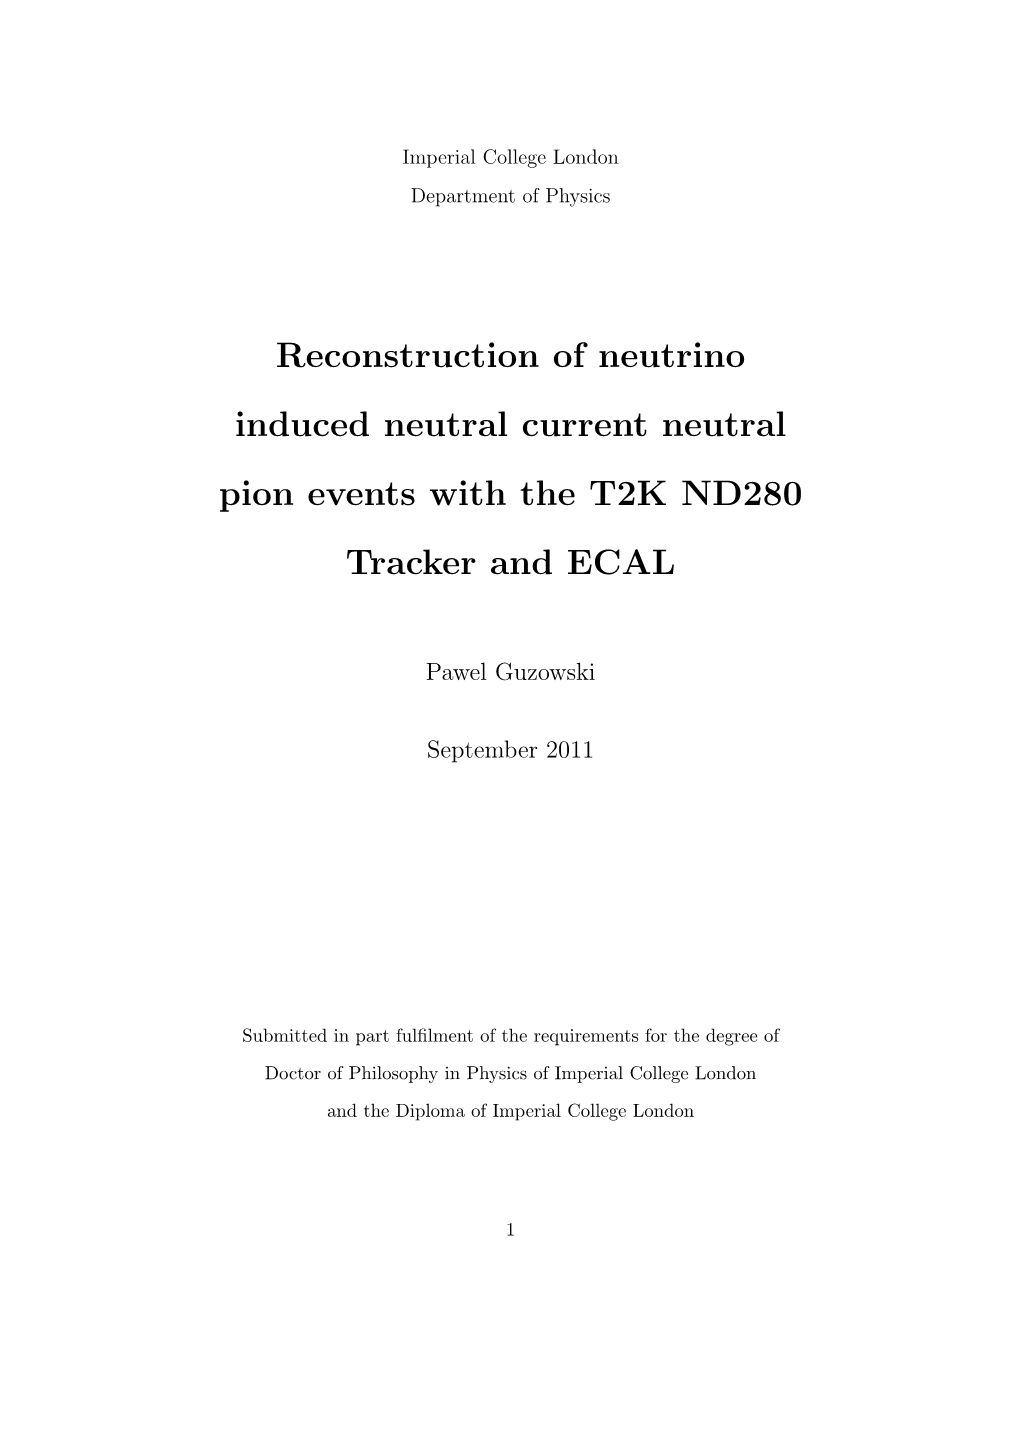 Reconstruction of Neutrino Induced Neutral Current Neutral Pion Events with the T2K ND280 Tracker and ECAL